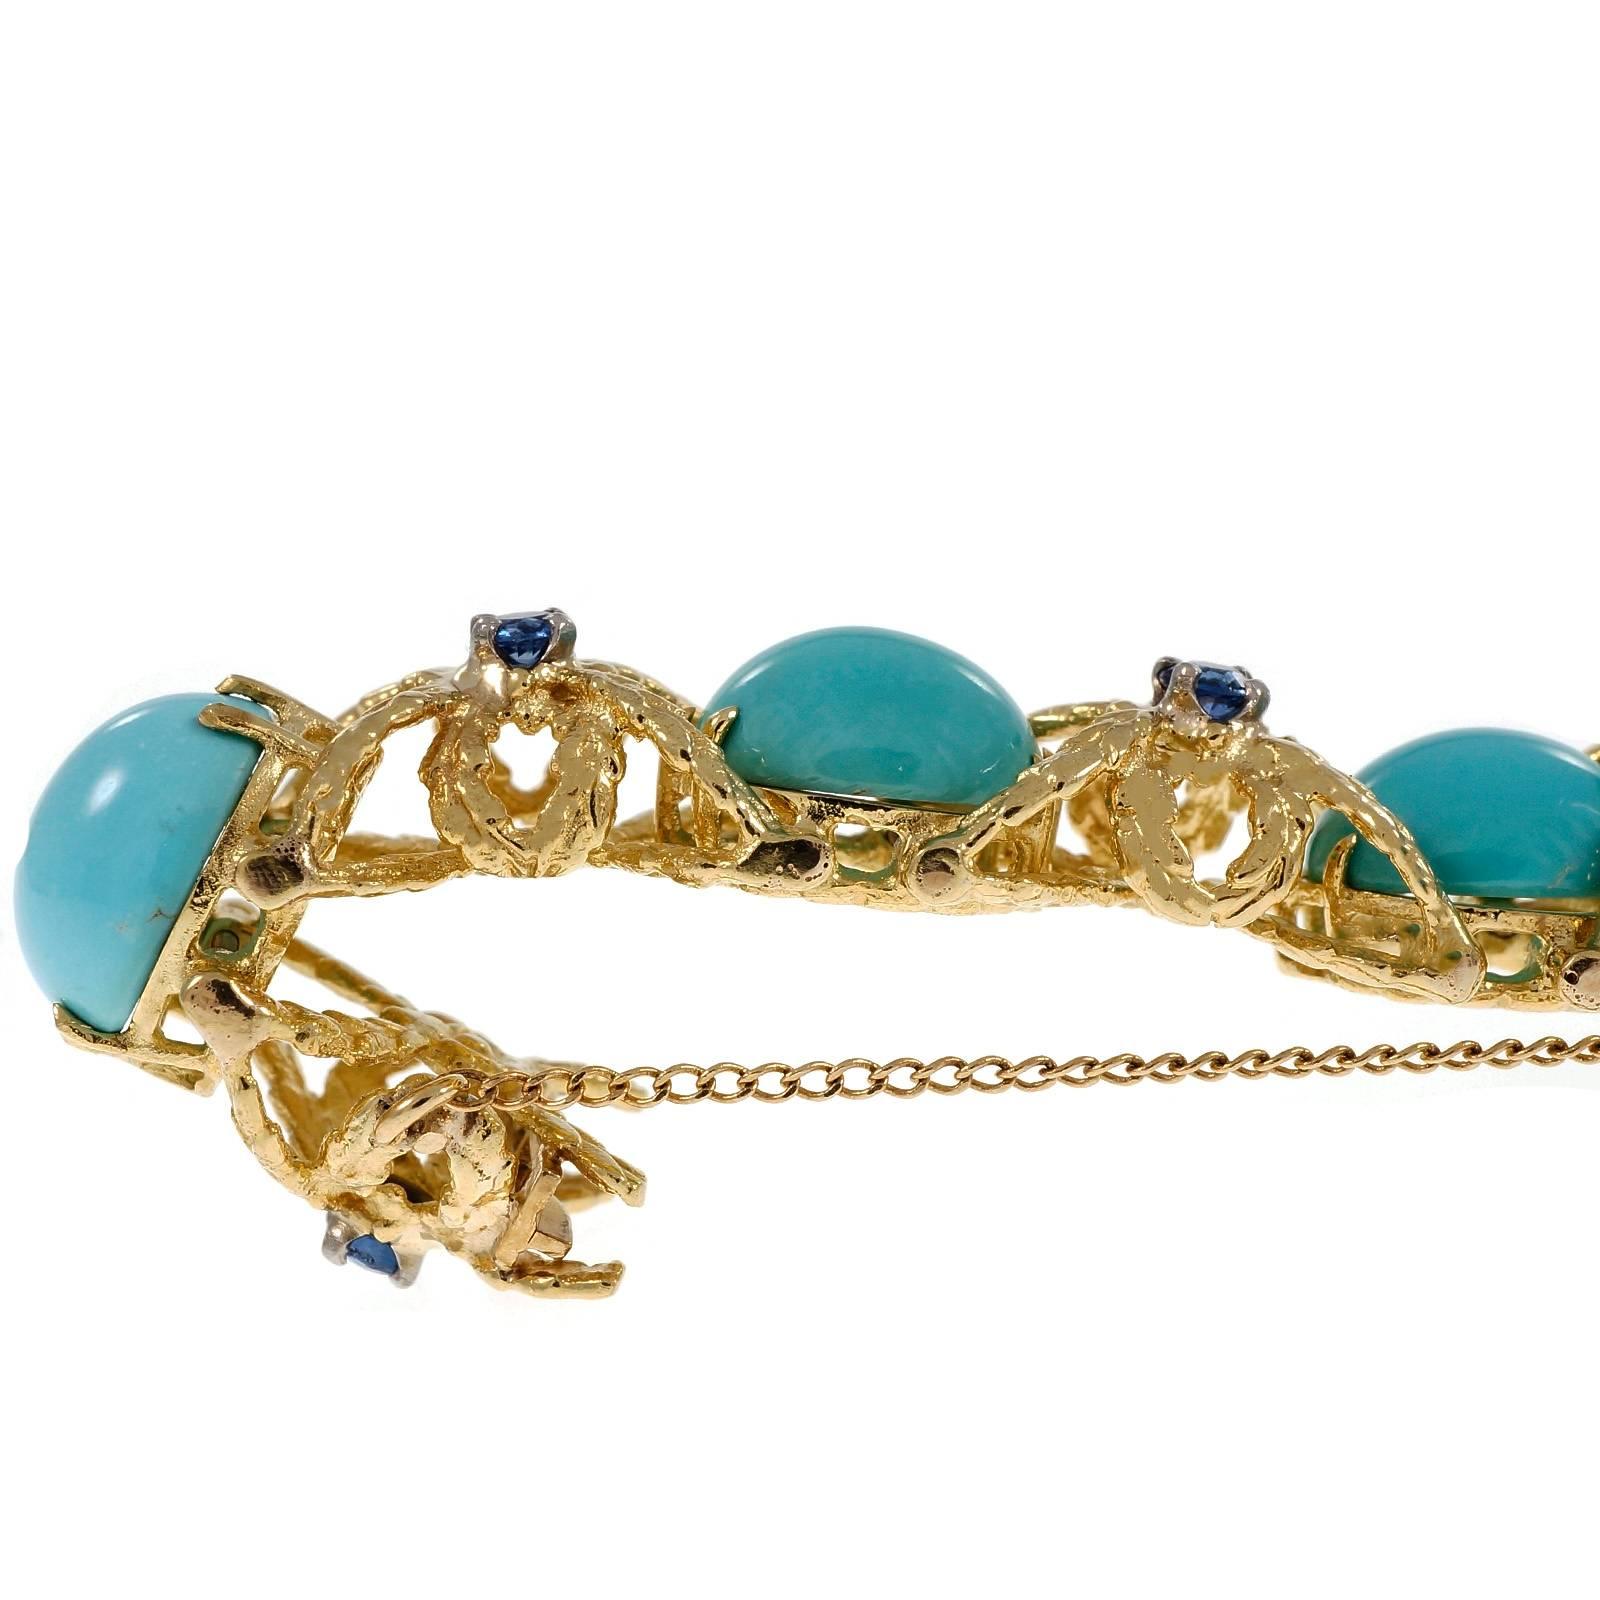 Handmade highly detailed 18k yellow gold bracelet circa 1950 with bright natural untreated Persian Turquoise and fine vivid blue natural Sapphires. Built in clasp and safety chain.

10 oval cabochon blue Turquoise, opaque, 9.70 x 7.96 x 4.12mm,